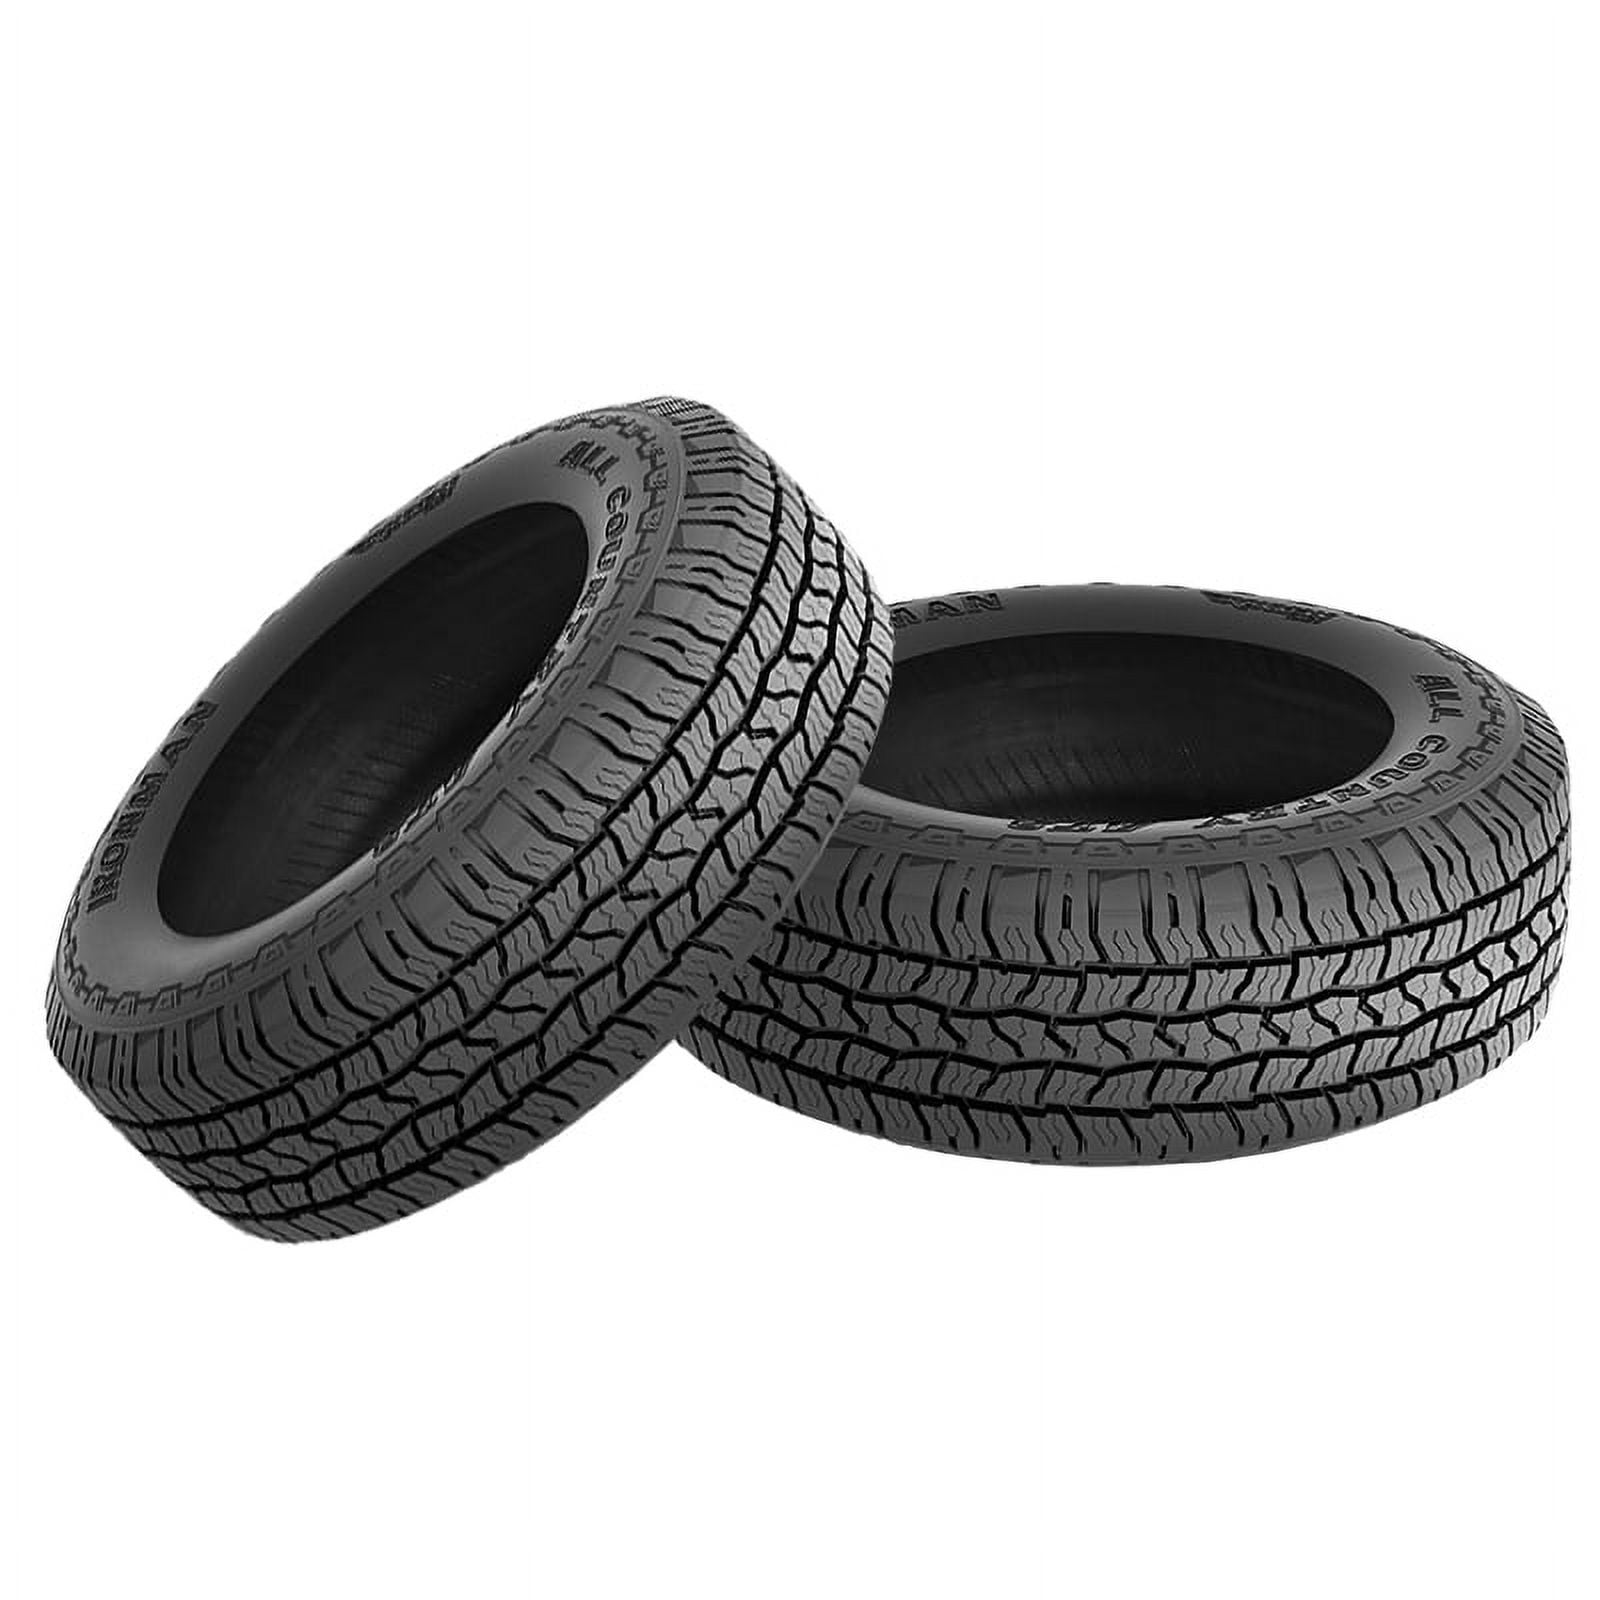 IRONMAN ALL COUNTRY AT2 LT285/70R17 121/118S E BW ALL SEASON TIRE